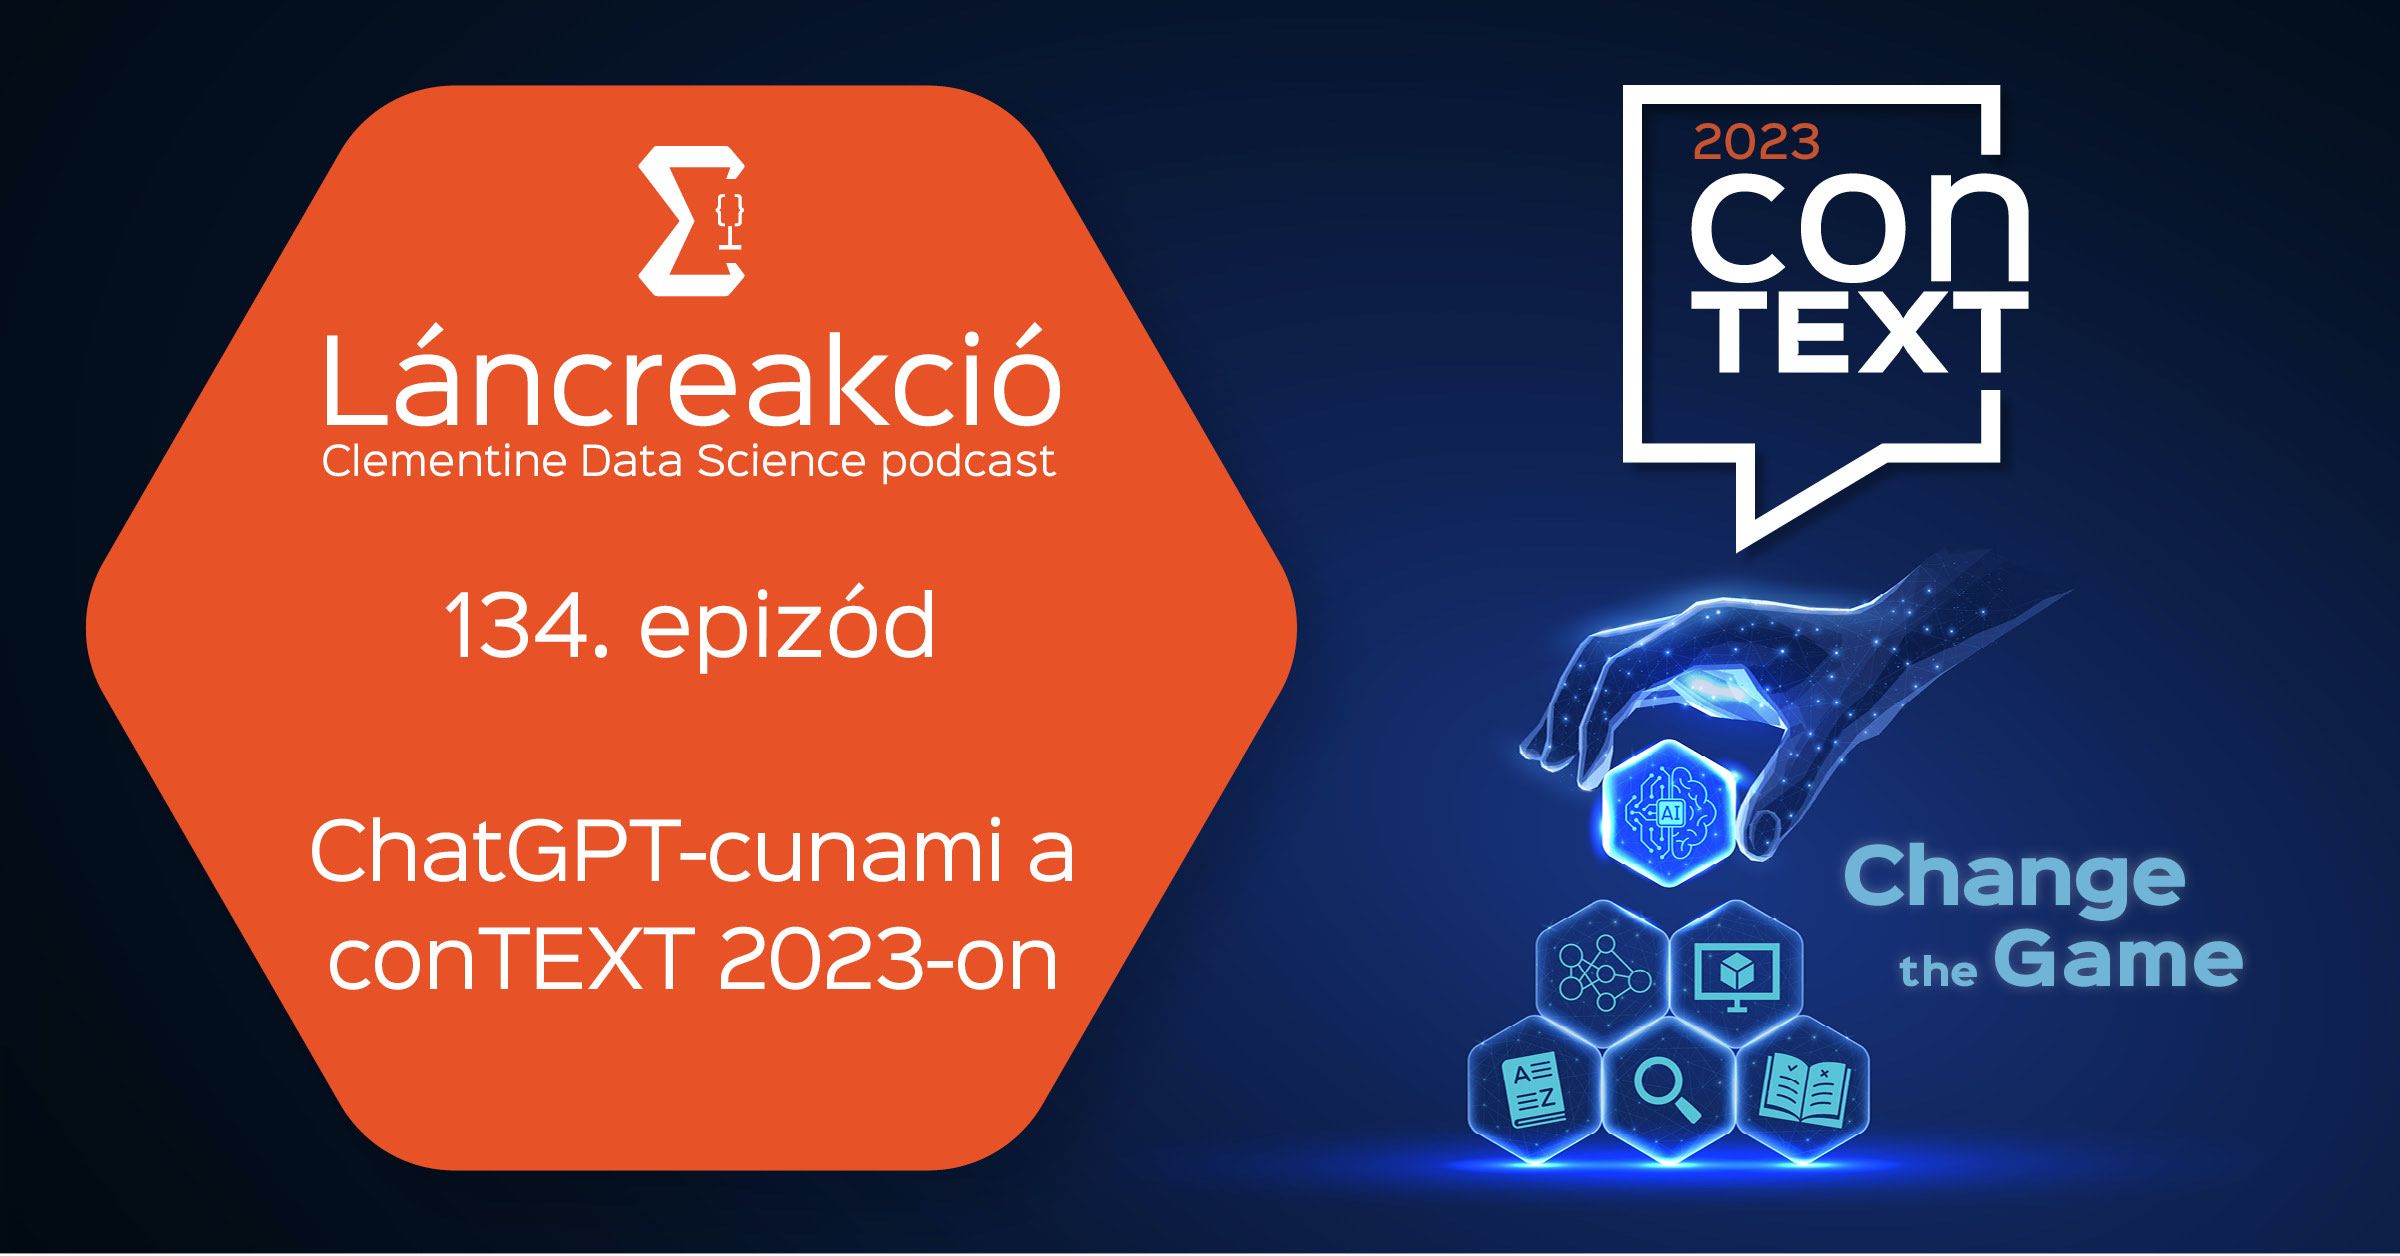 ChatGPT-cunami a conTEXT 2023-on